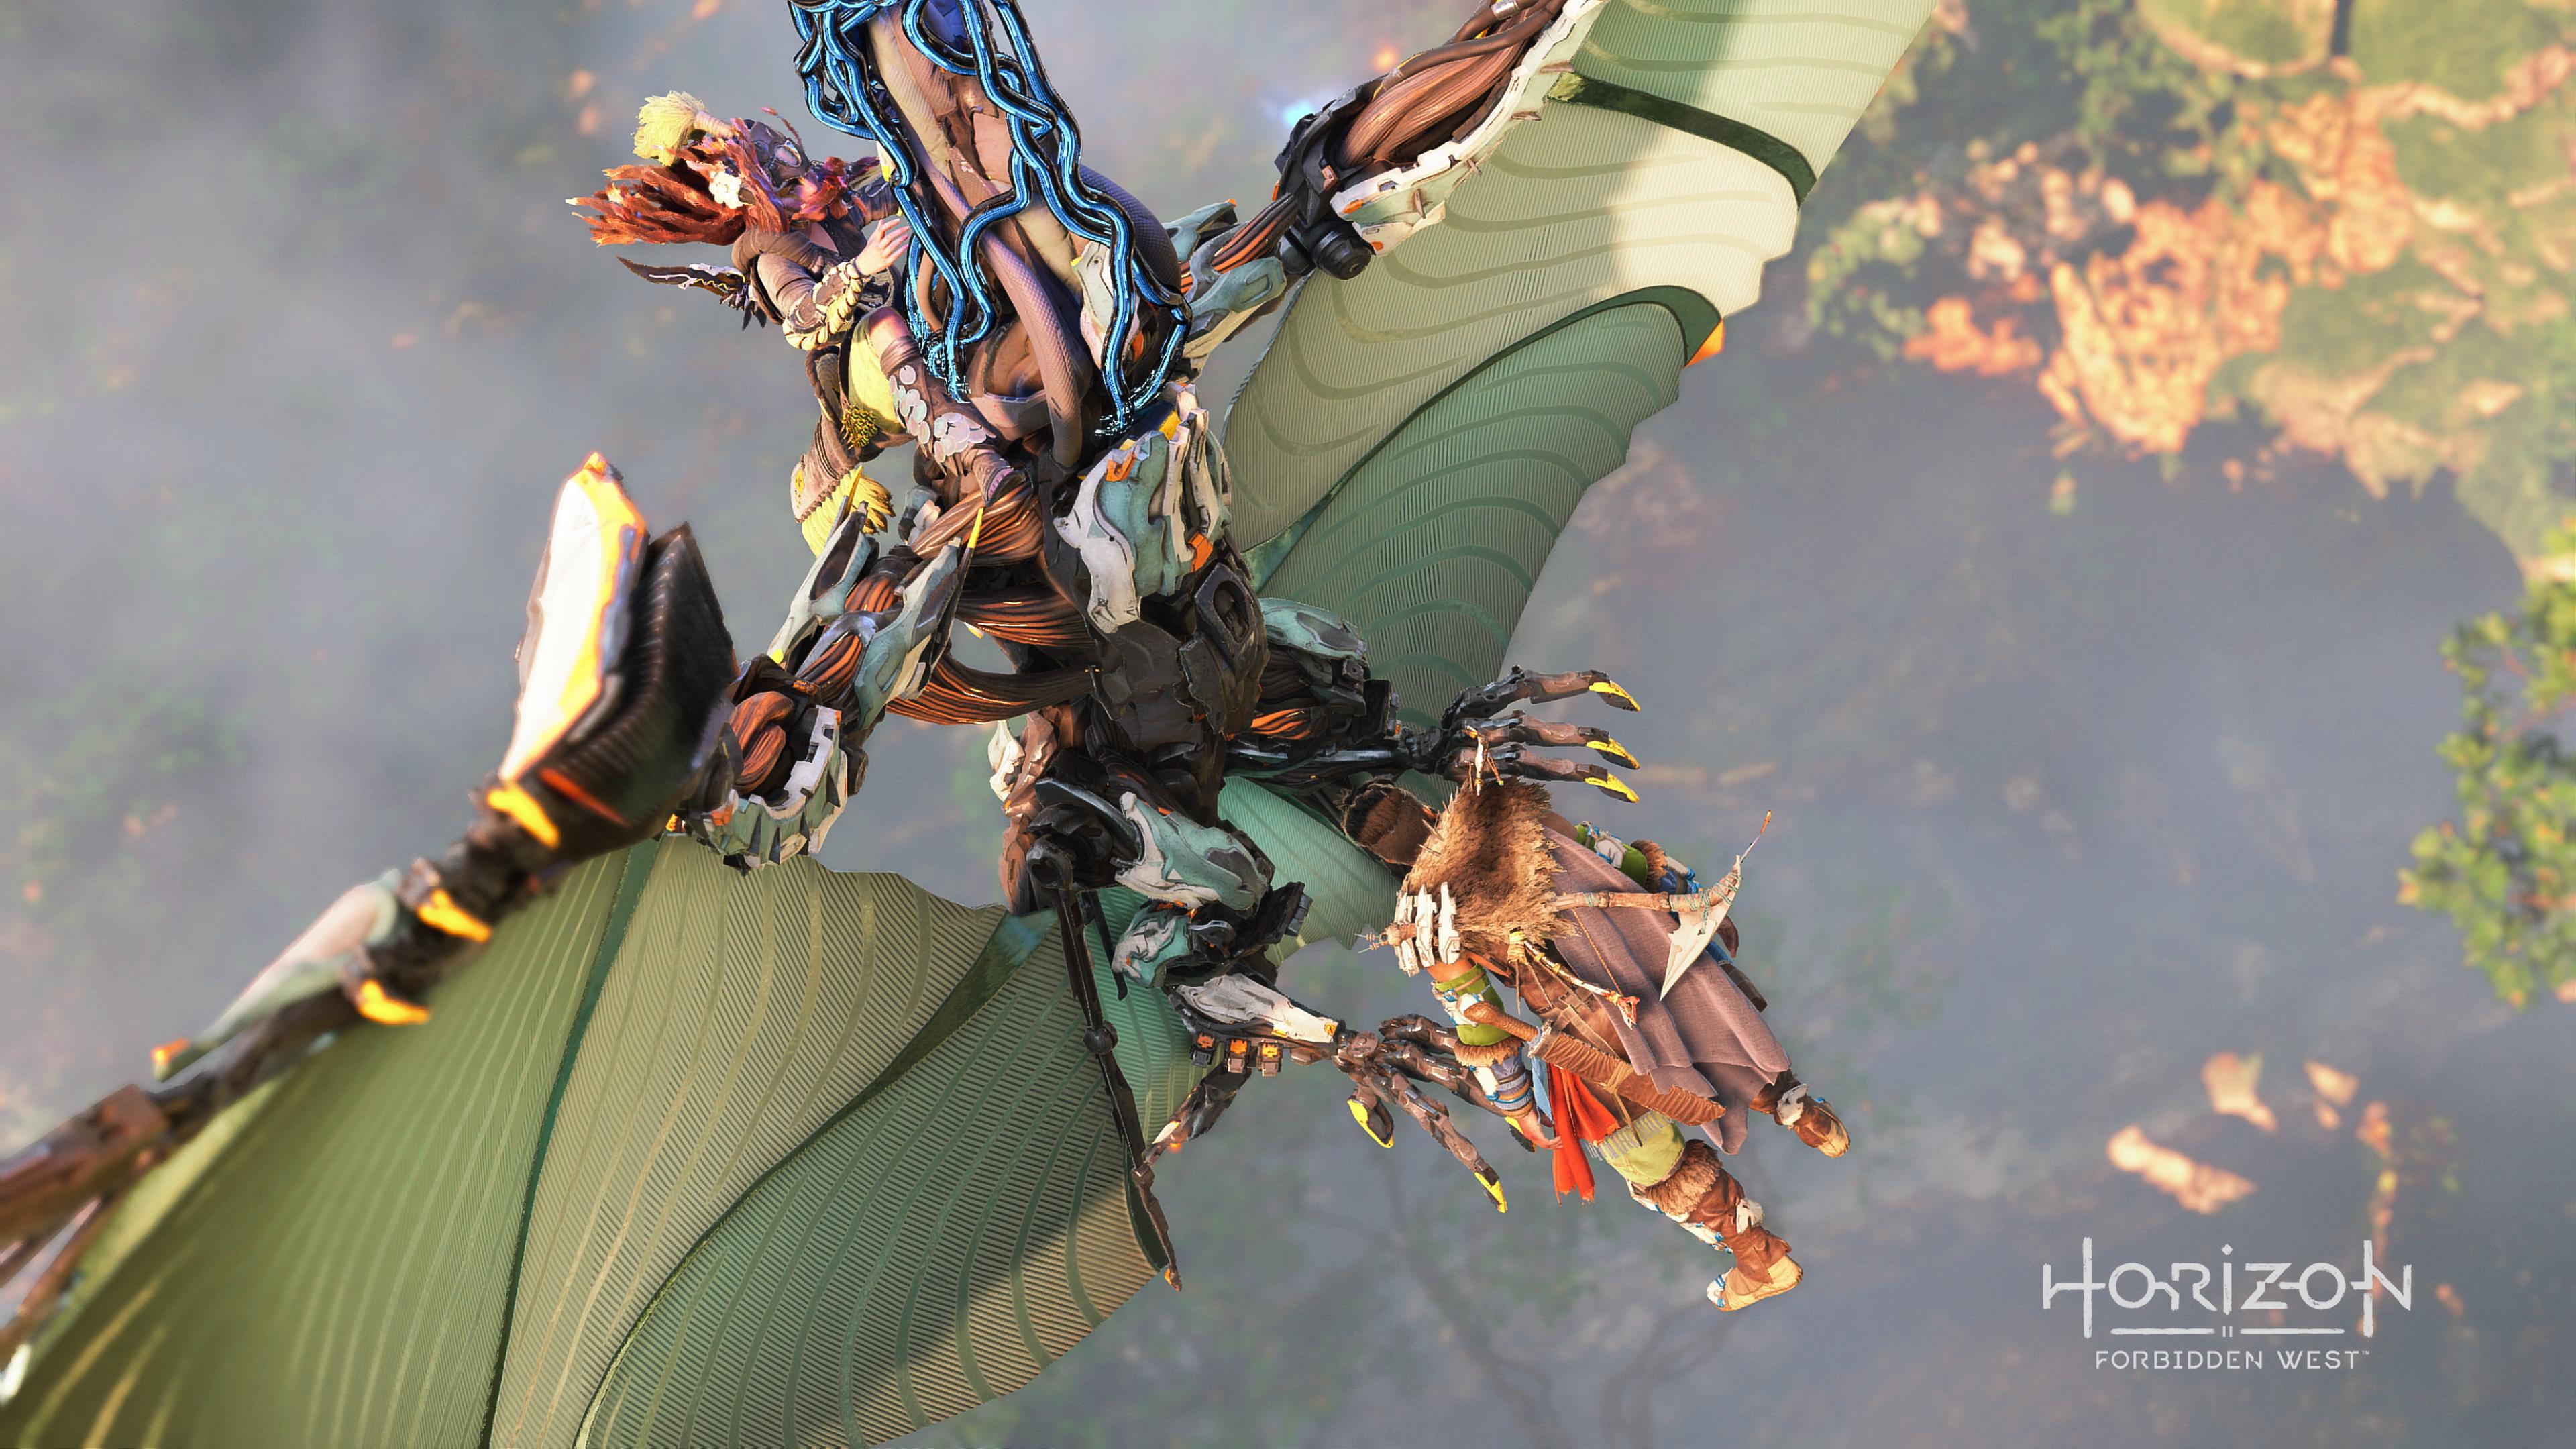 Guerrilla on X: To celebrate Horizon Forbidden West Complete Edition,  we're going back to the beginning: show off your shots set in the Far  Zenith Launch Facility at the start of the